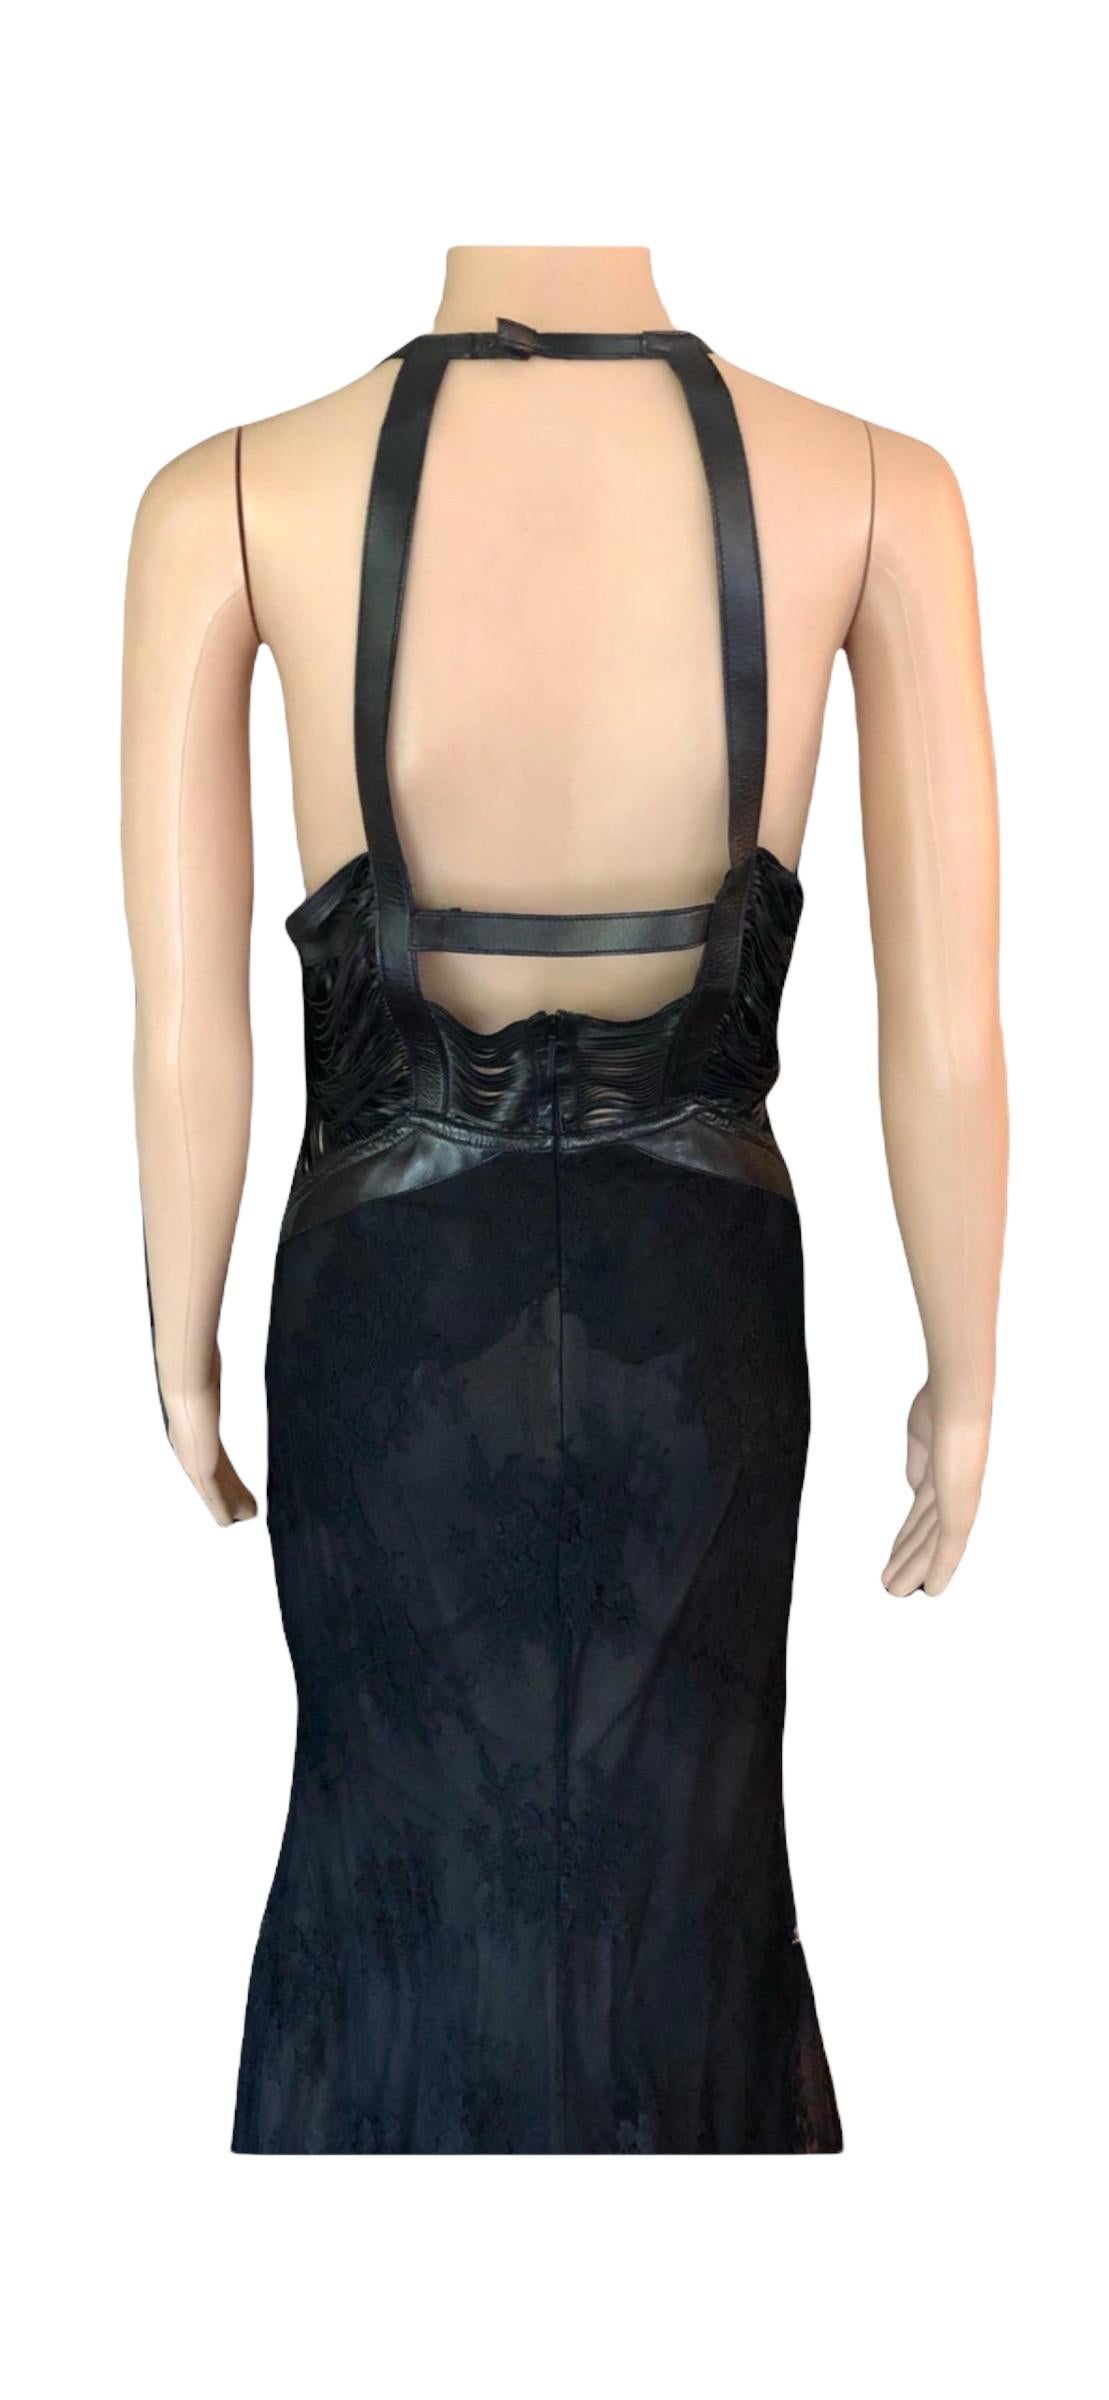 Roberto Cavalli S/S 2013 Leather Cutout Open Back Black Evening Dress Gown For Sale 12